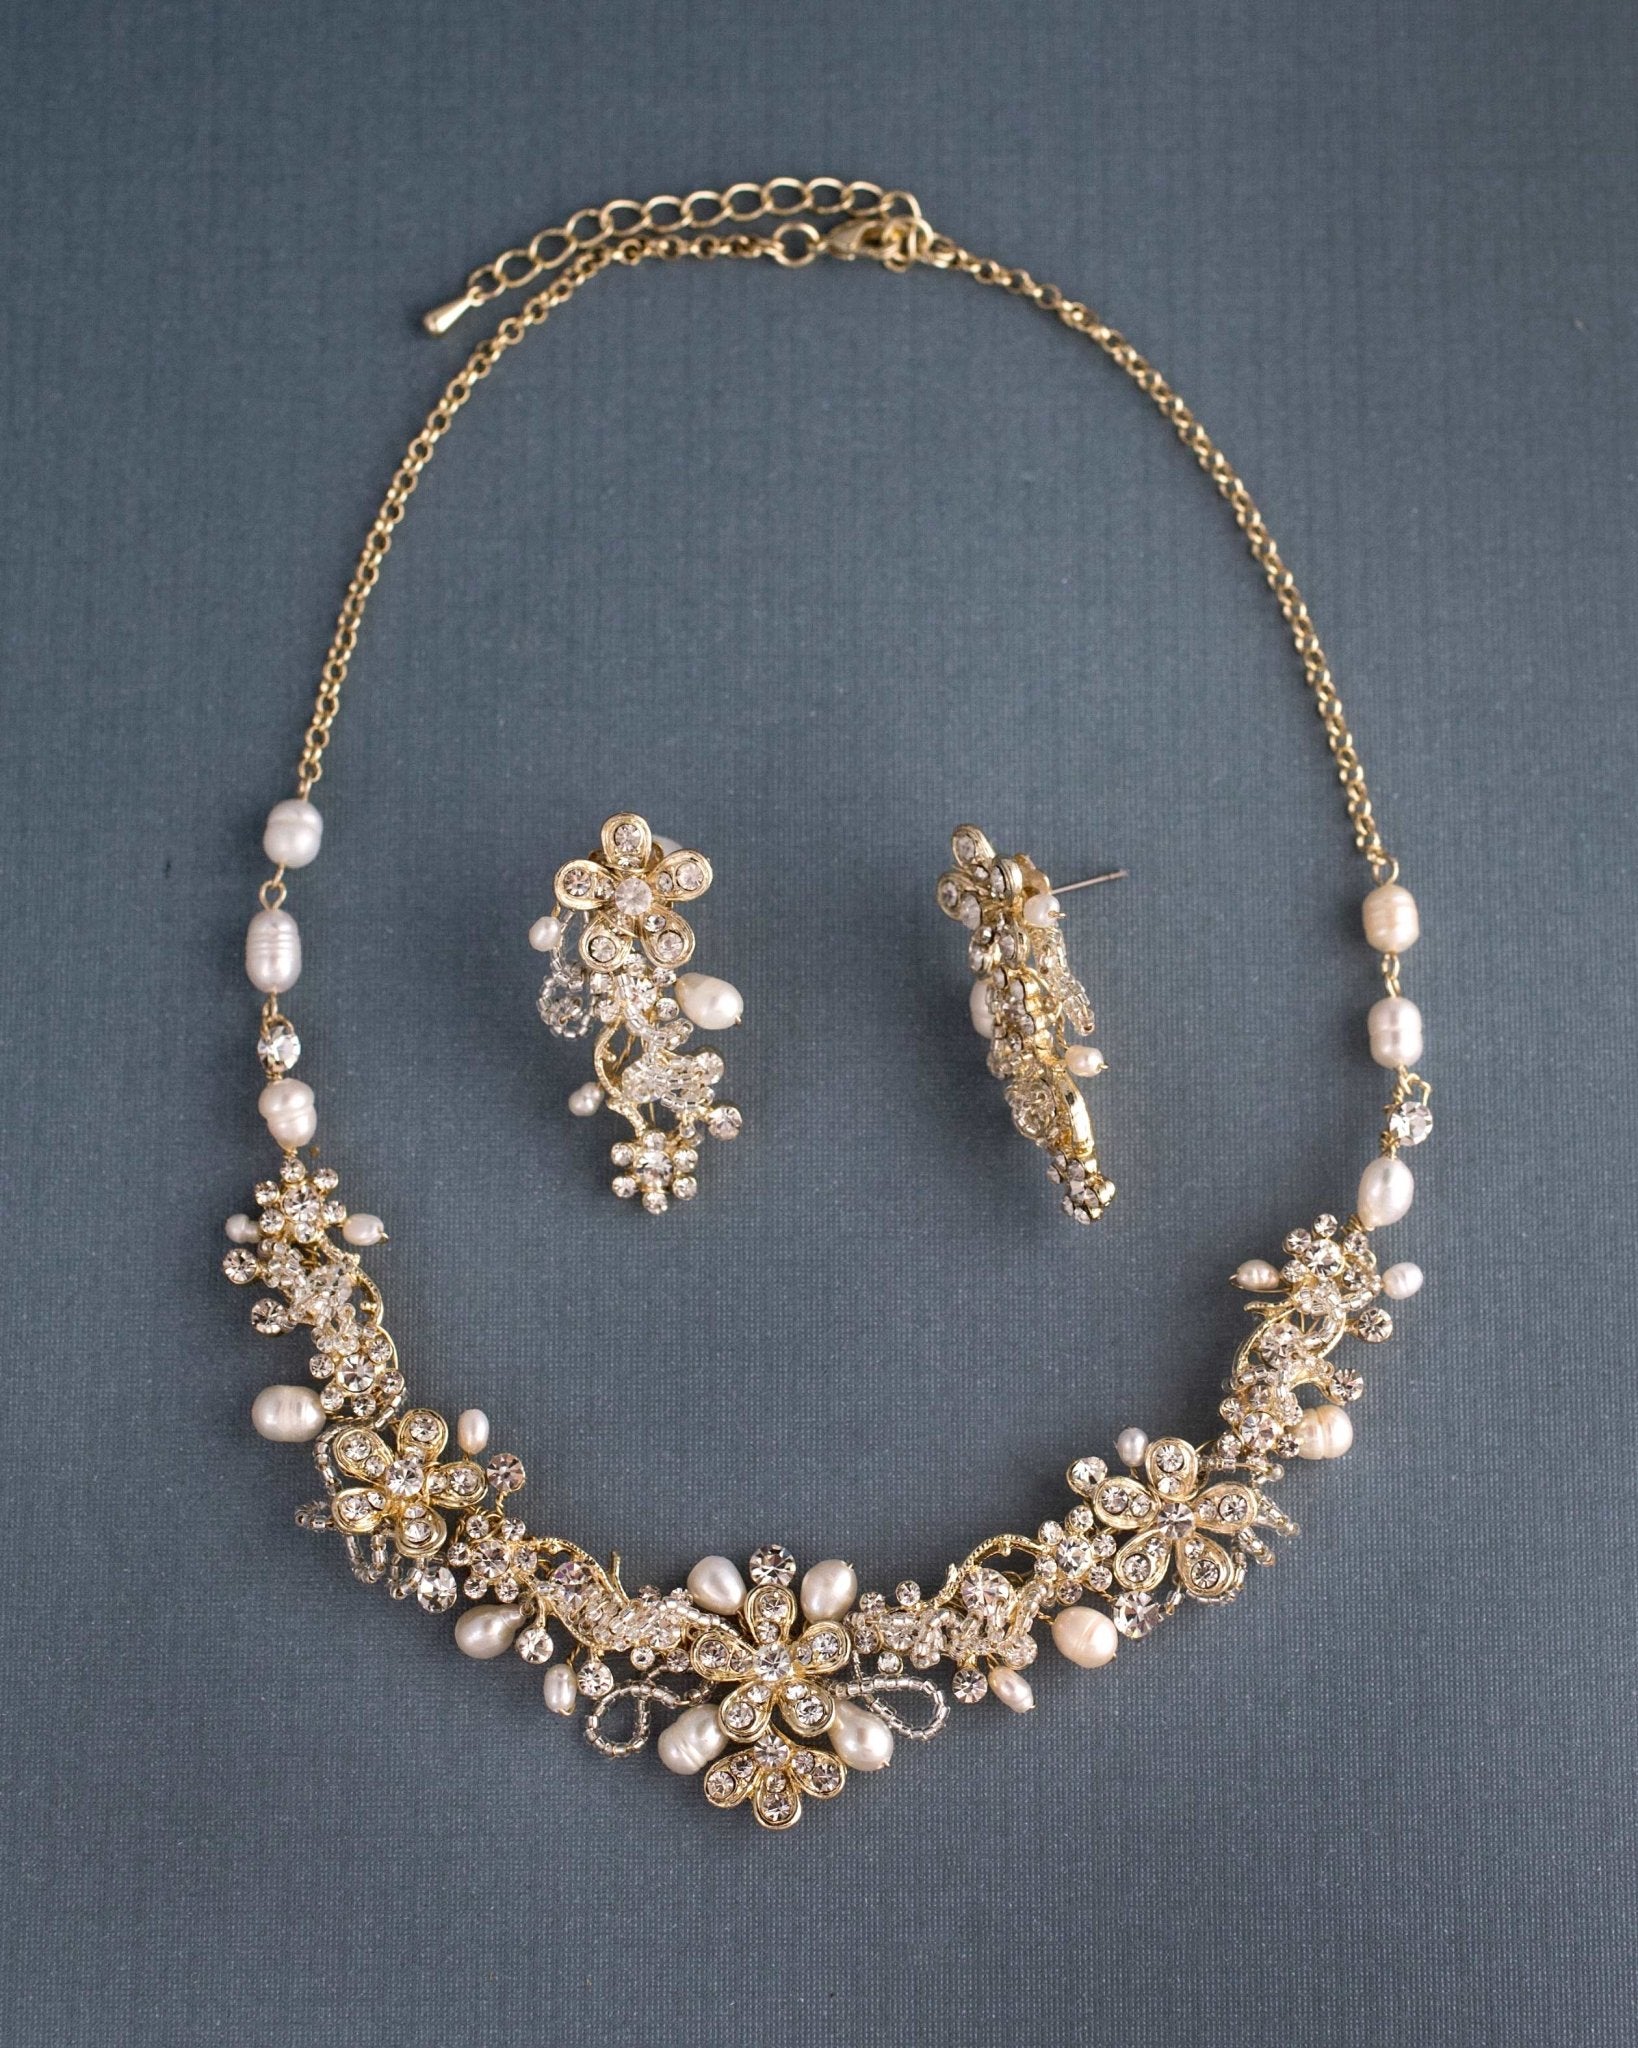 Bridal Necklace Set with Pearls in Gold